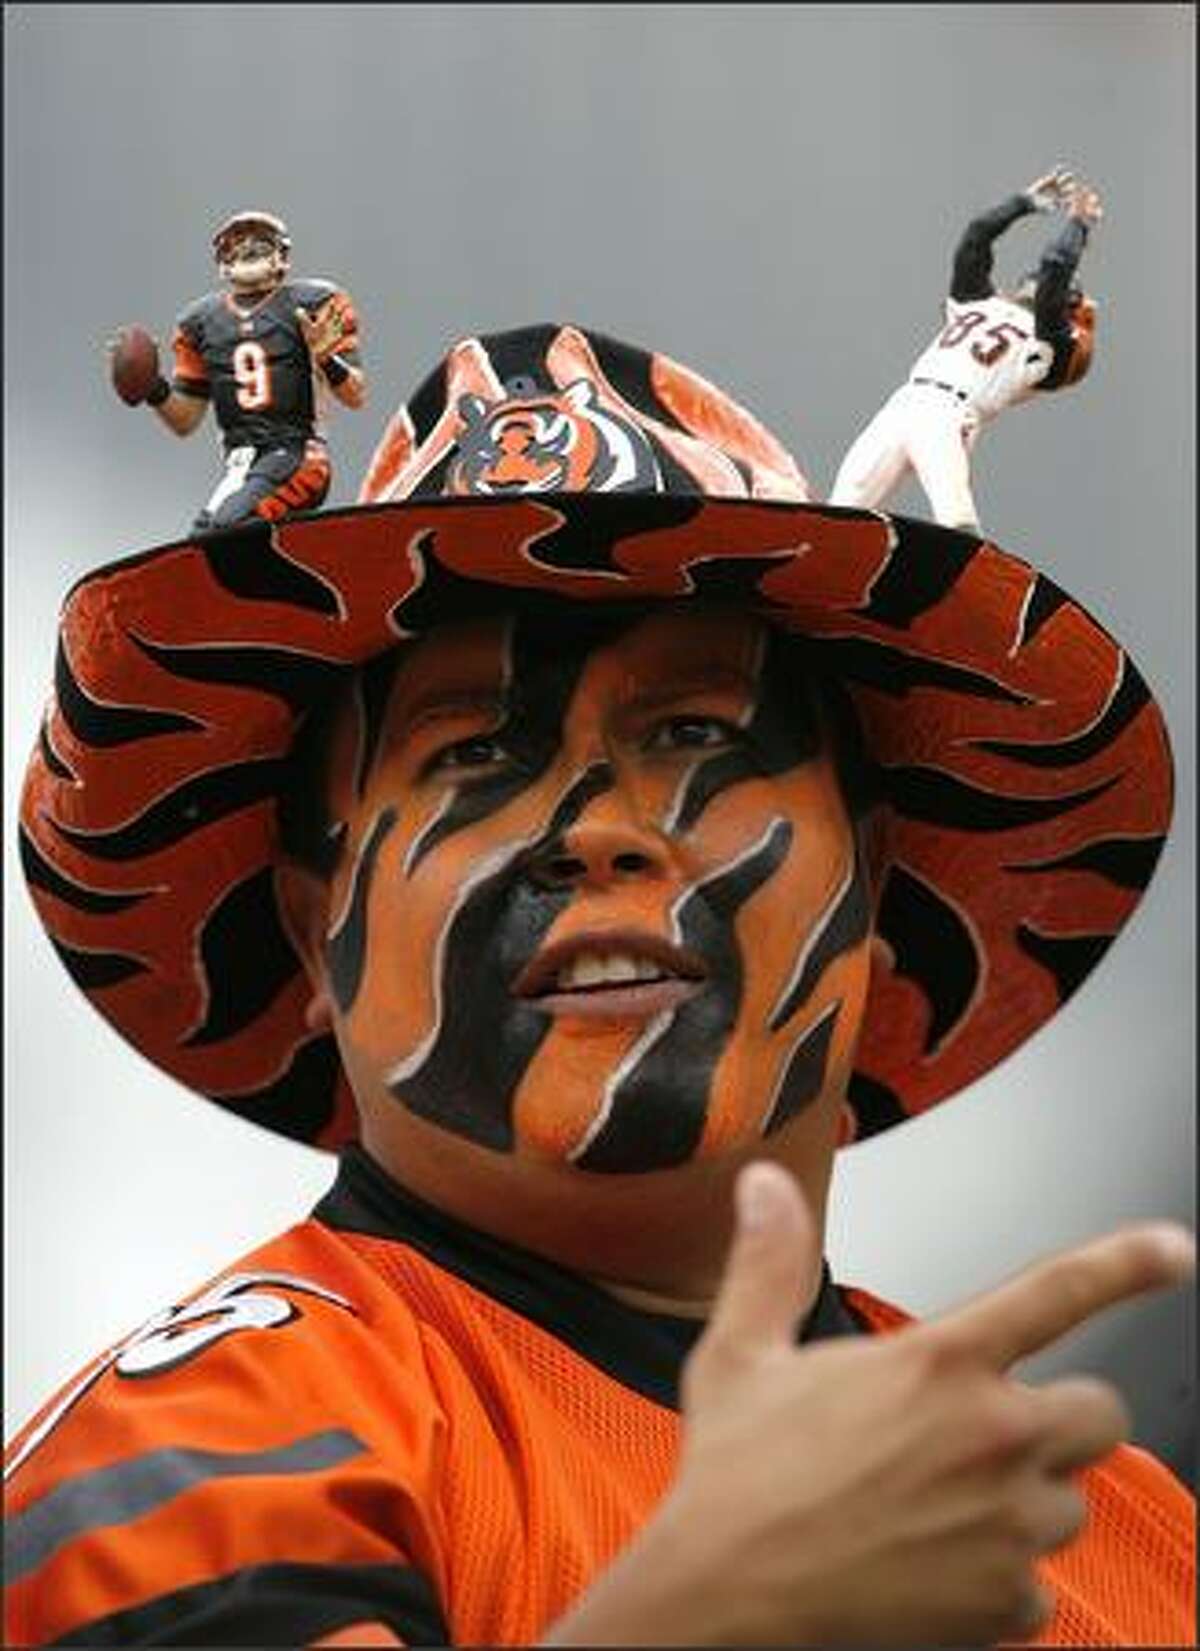 A Cincinnati Bengals fan watches a game against the Tennessee Titans during the second quarter of their NFL game Sept. 14.